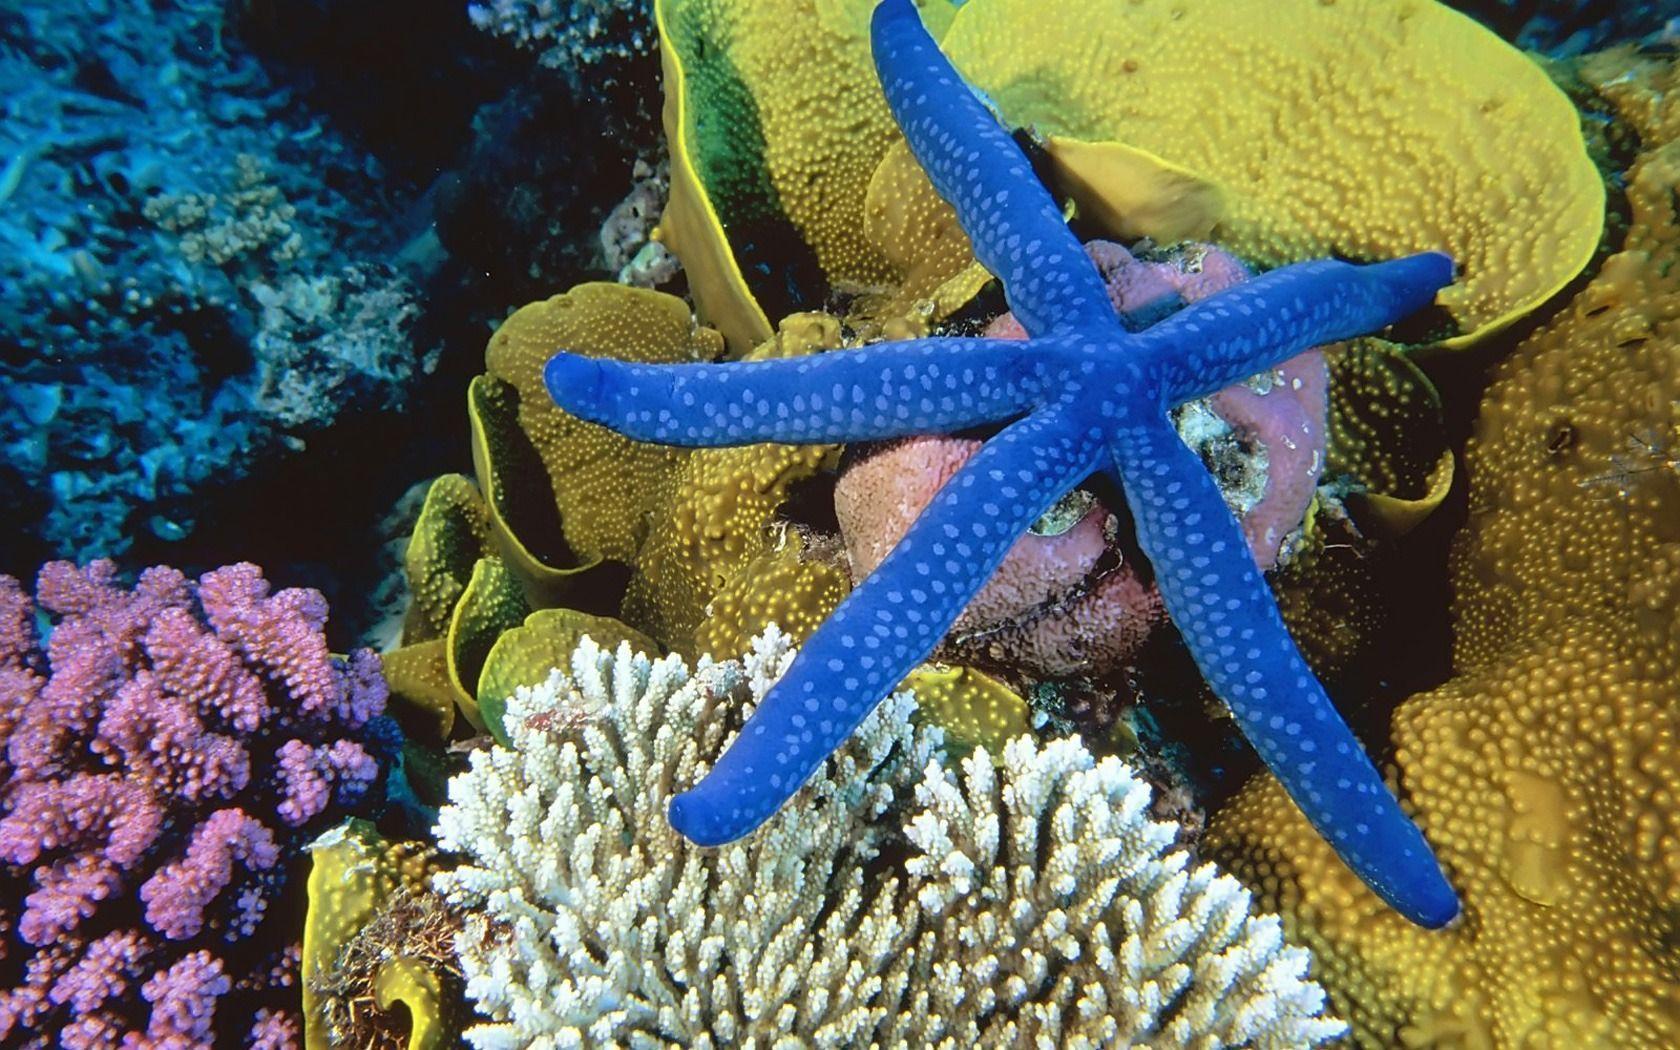 Sea Star Wallpaper Other Animals Wallpaper in jpg format for free